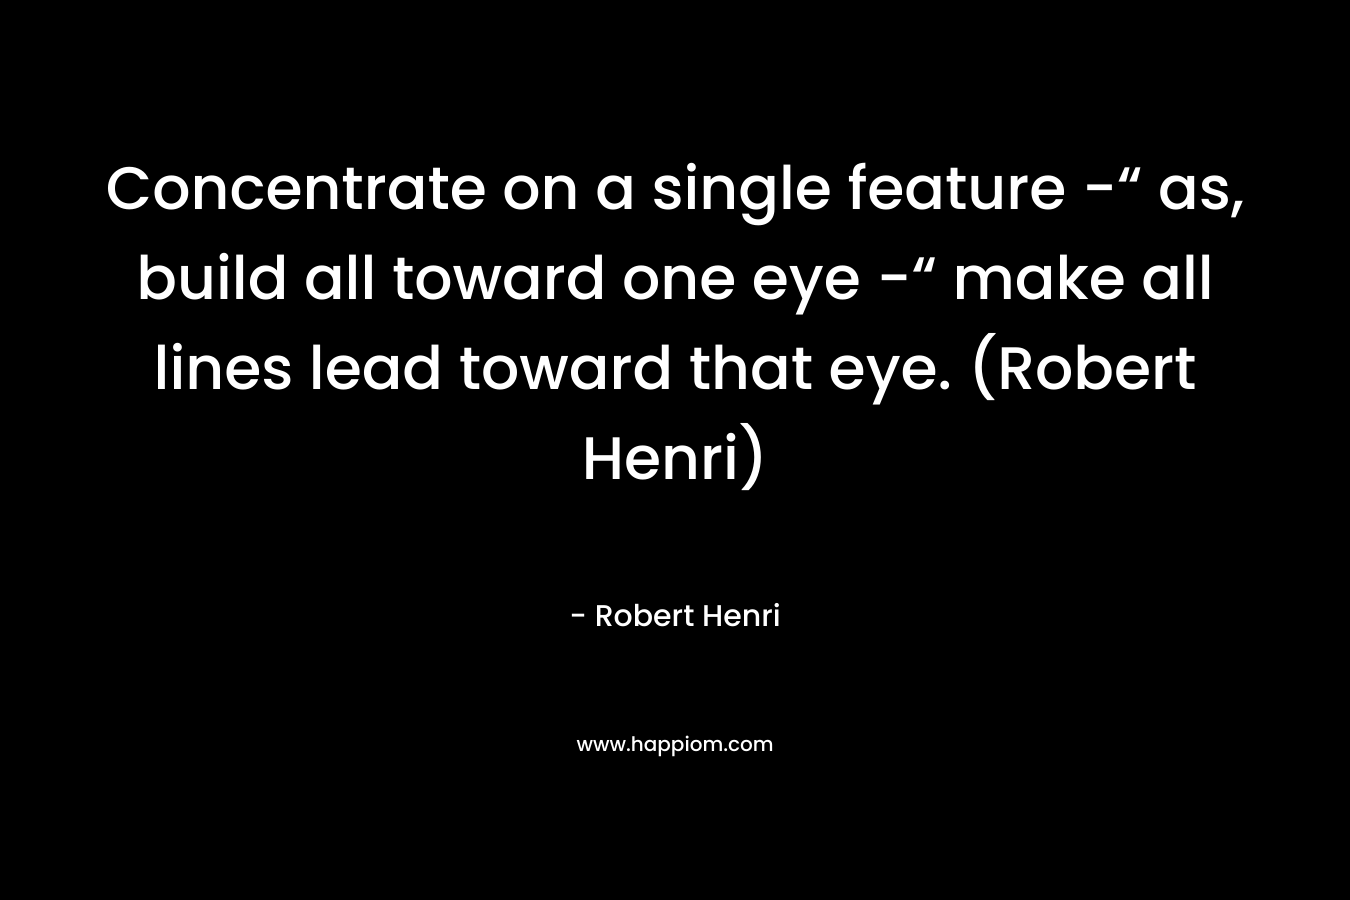 Concentrate on a single feature -“ as, build all toward one eye -“ make all lines lead toward that eye. (Robert Henri) – Robert Henri